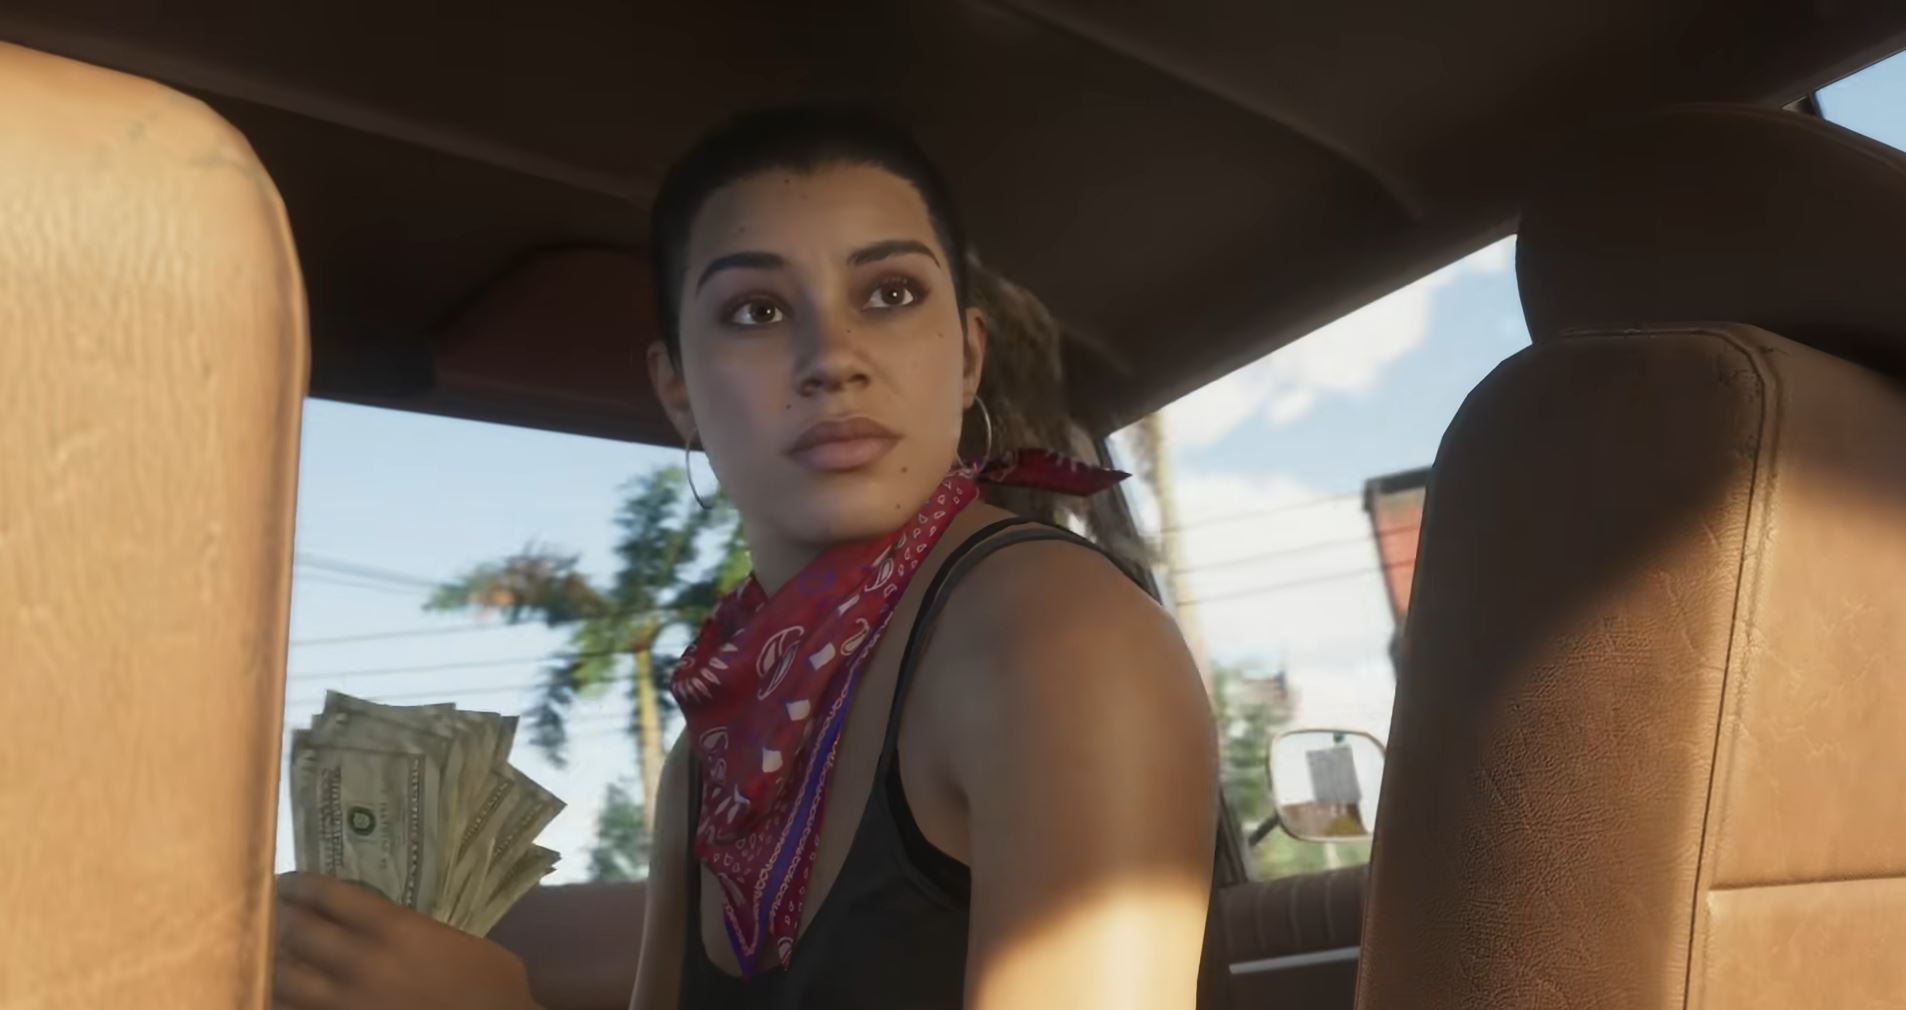 GTA 6: all the Easter eggs present in the trailer